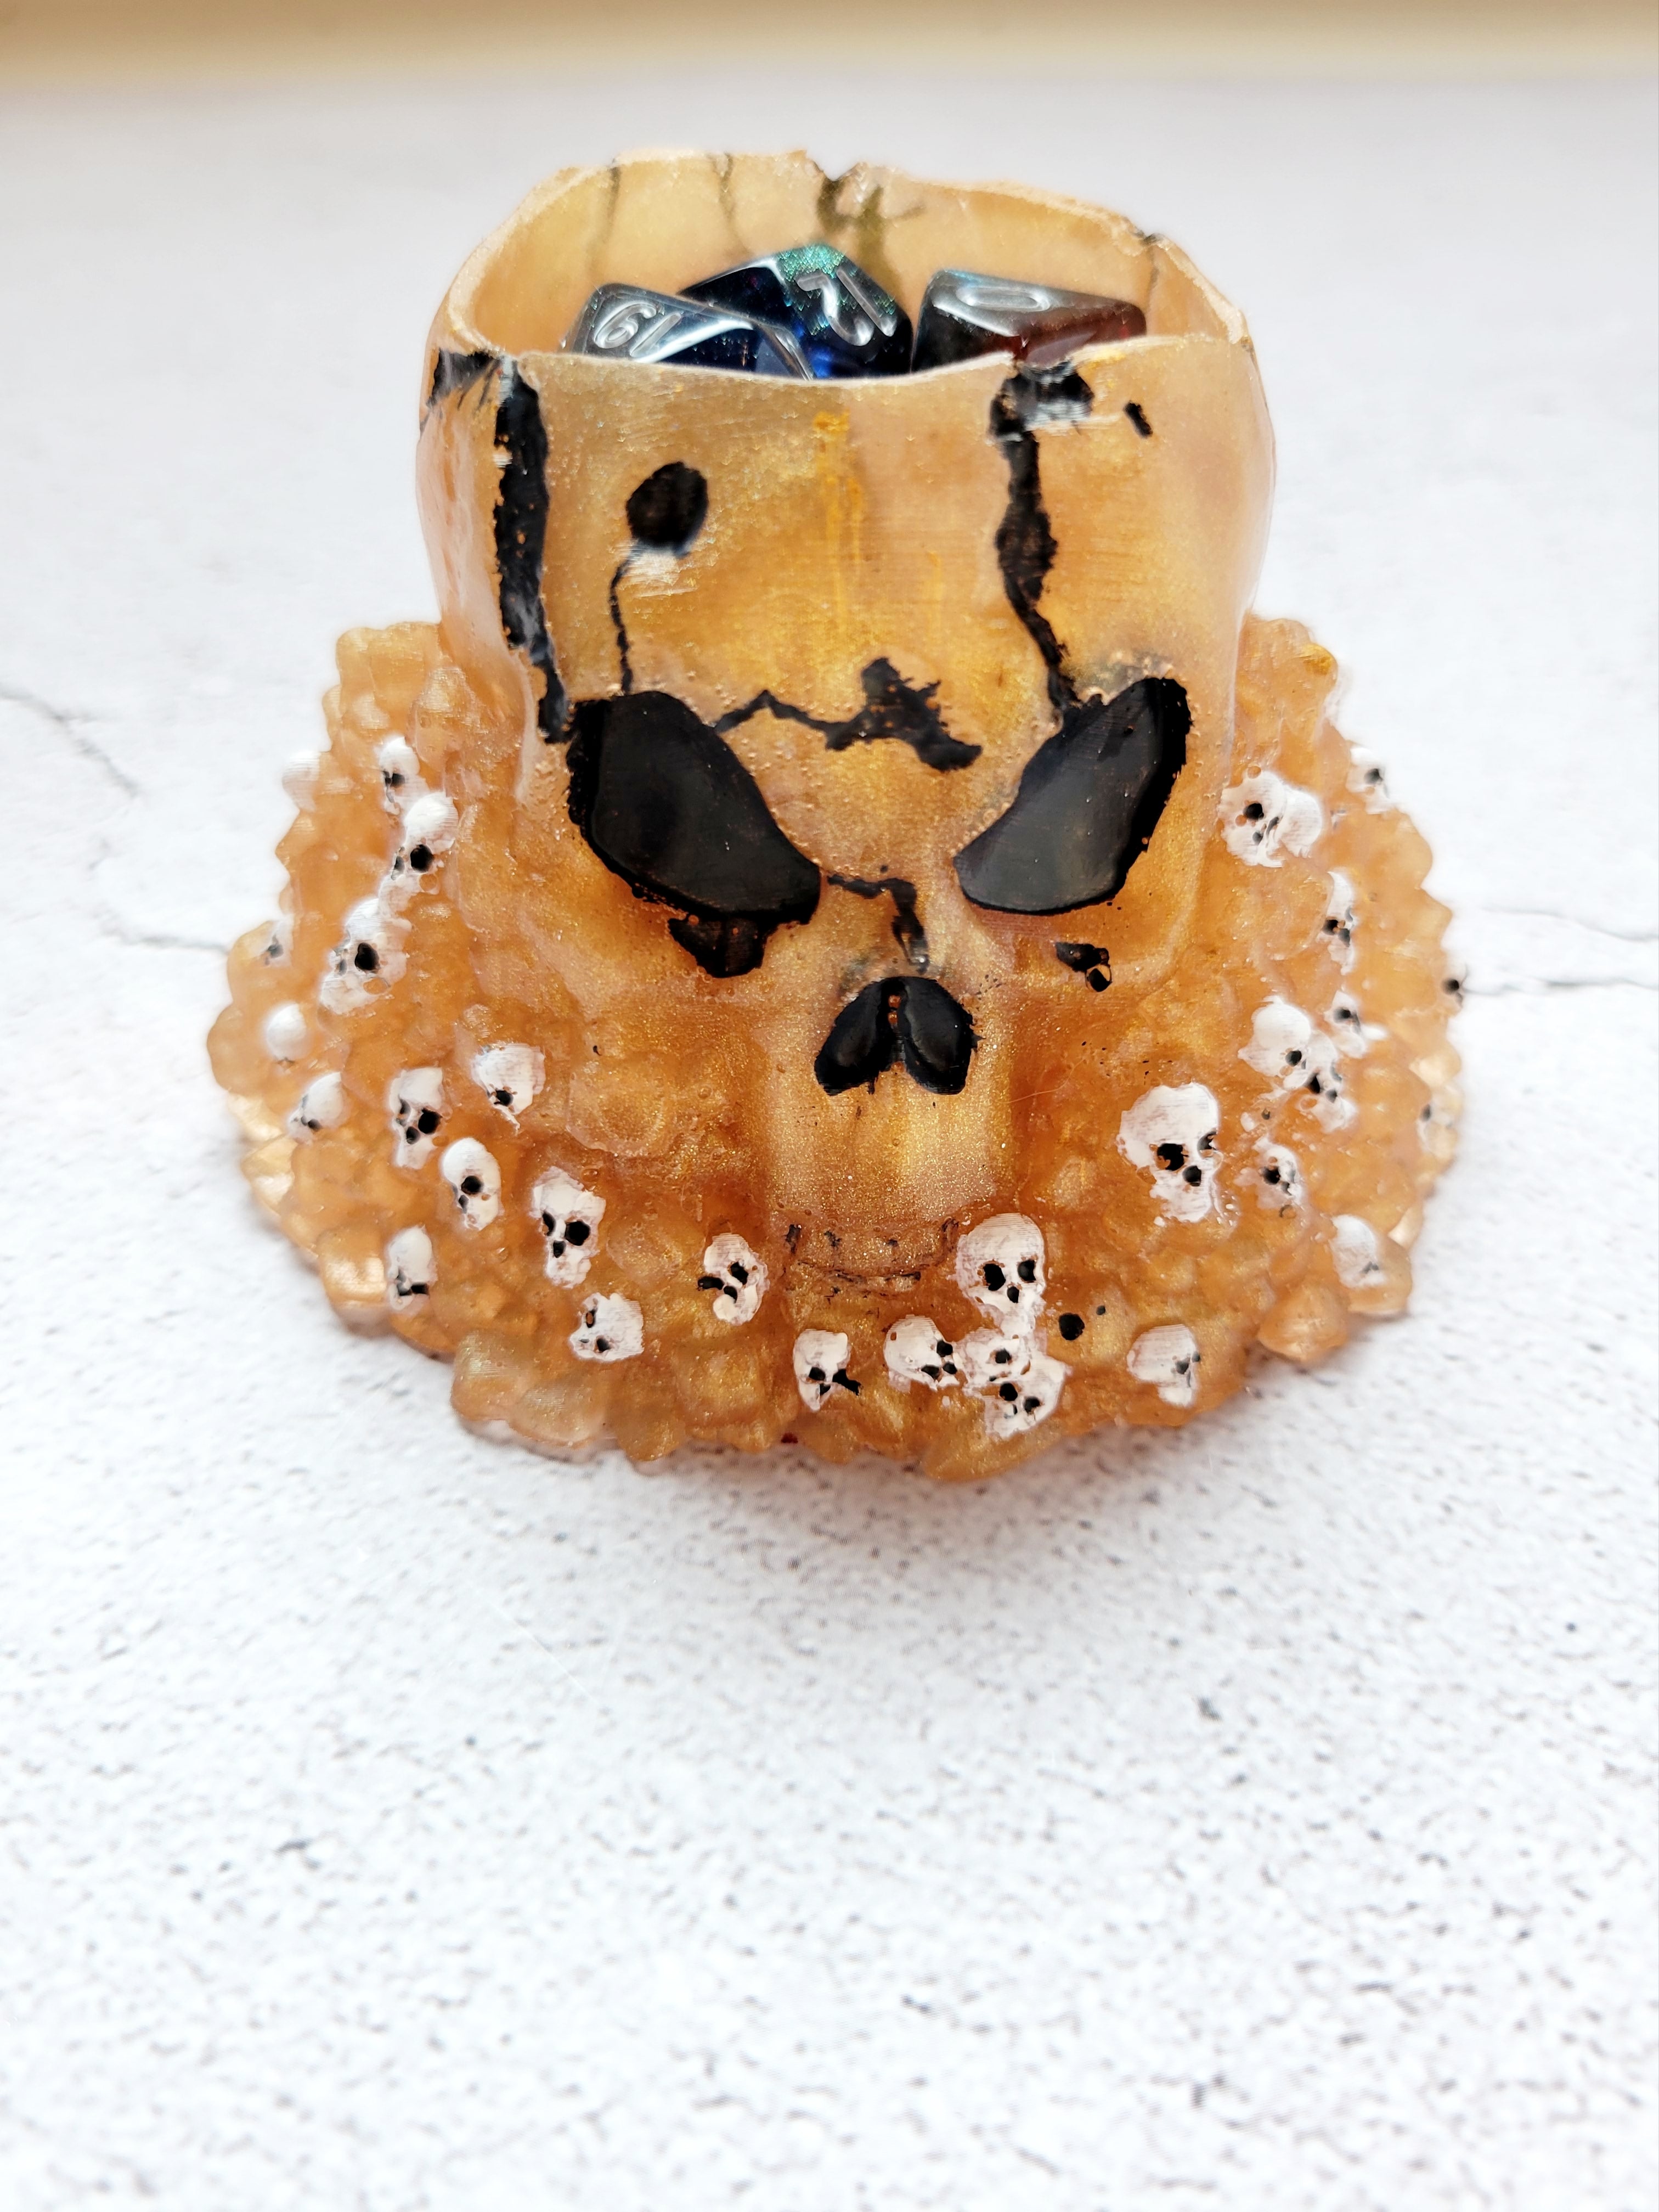 Resin skull dice cup. Big skull holds 2 sets of ttrpg dice comfortably with room for a few extra. The large skull sits on a pile of stones and smaller skulls. The color is a gold with smaller white skulls, black painted eyes, nose, and cracks. Front view with dice inside